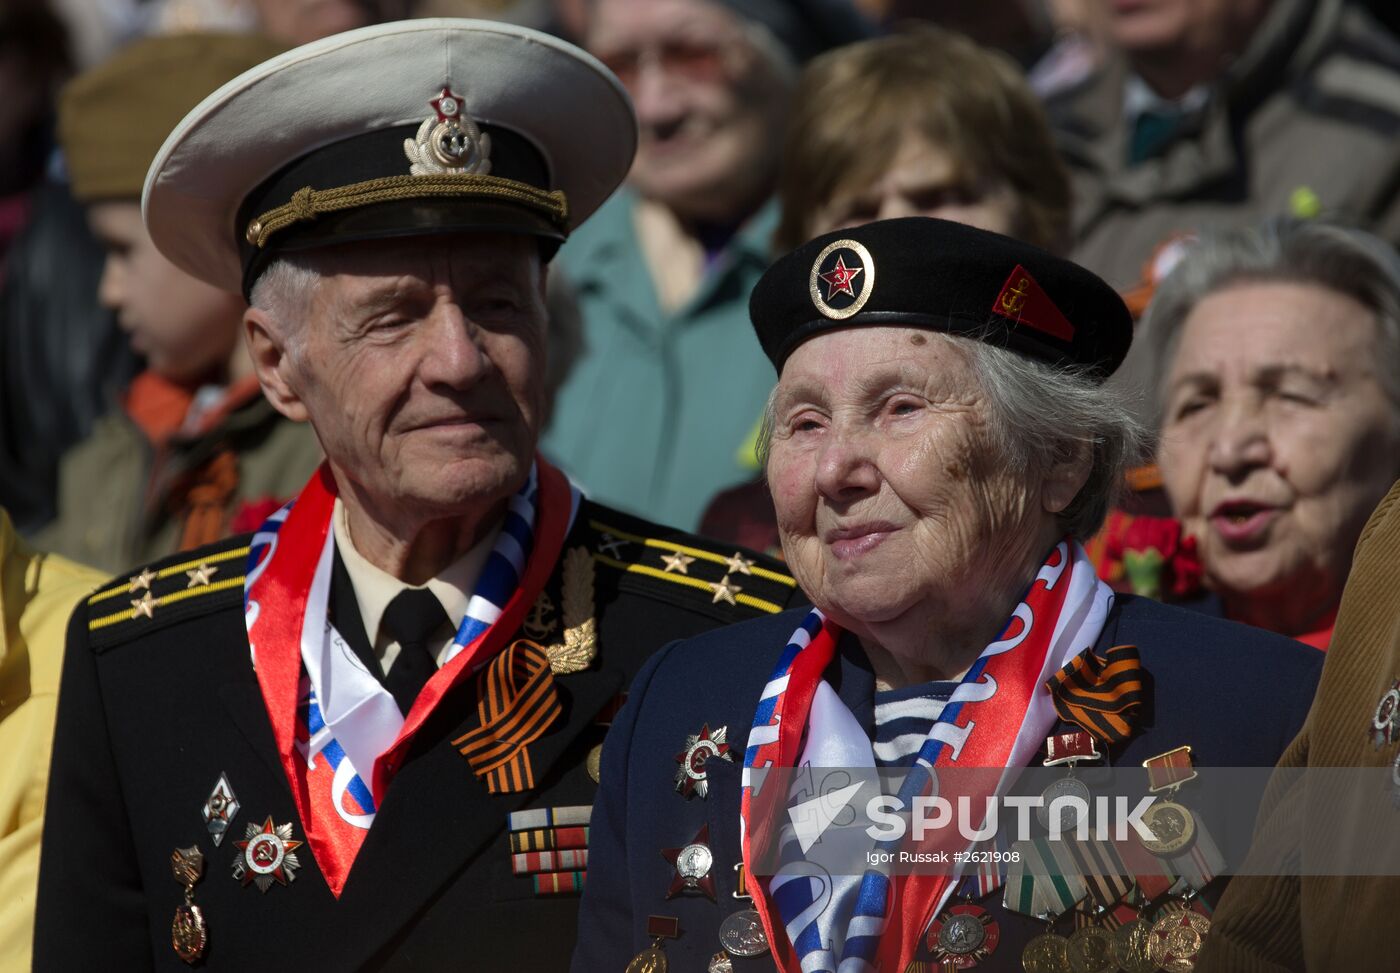 The Hero City of St. Petersburg celebrates 70th anniversary of Victory in 1941-1945 Great Patriotic War